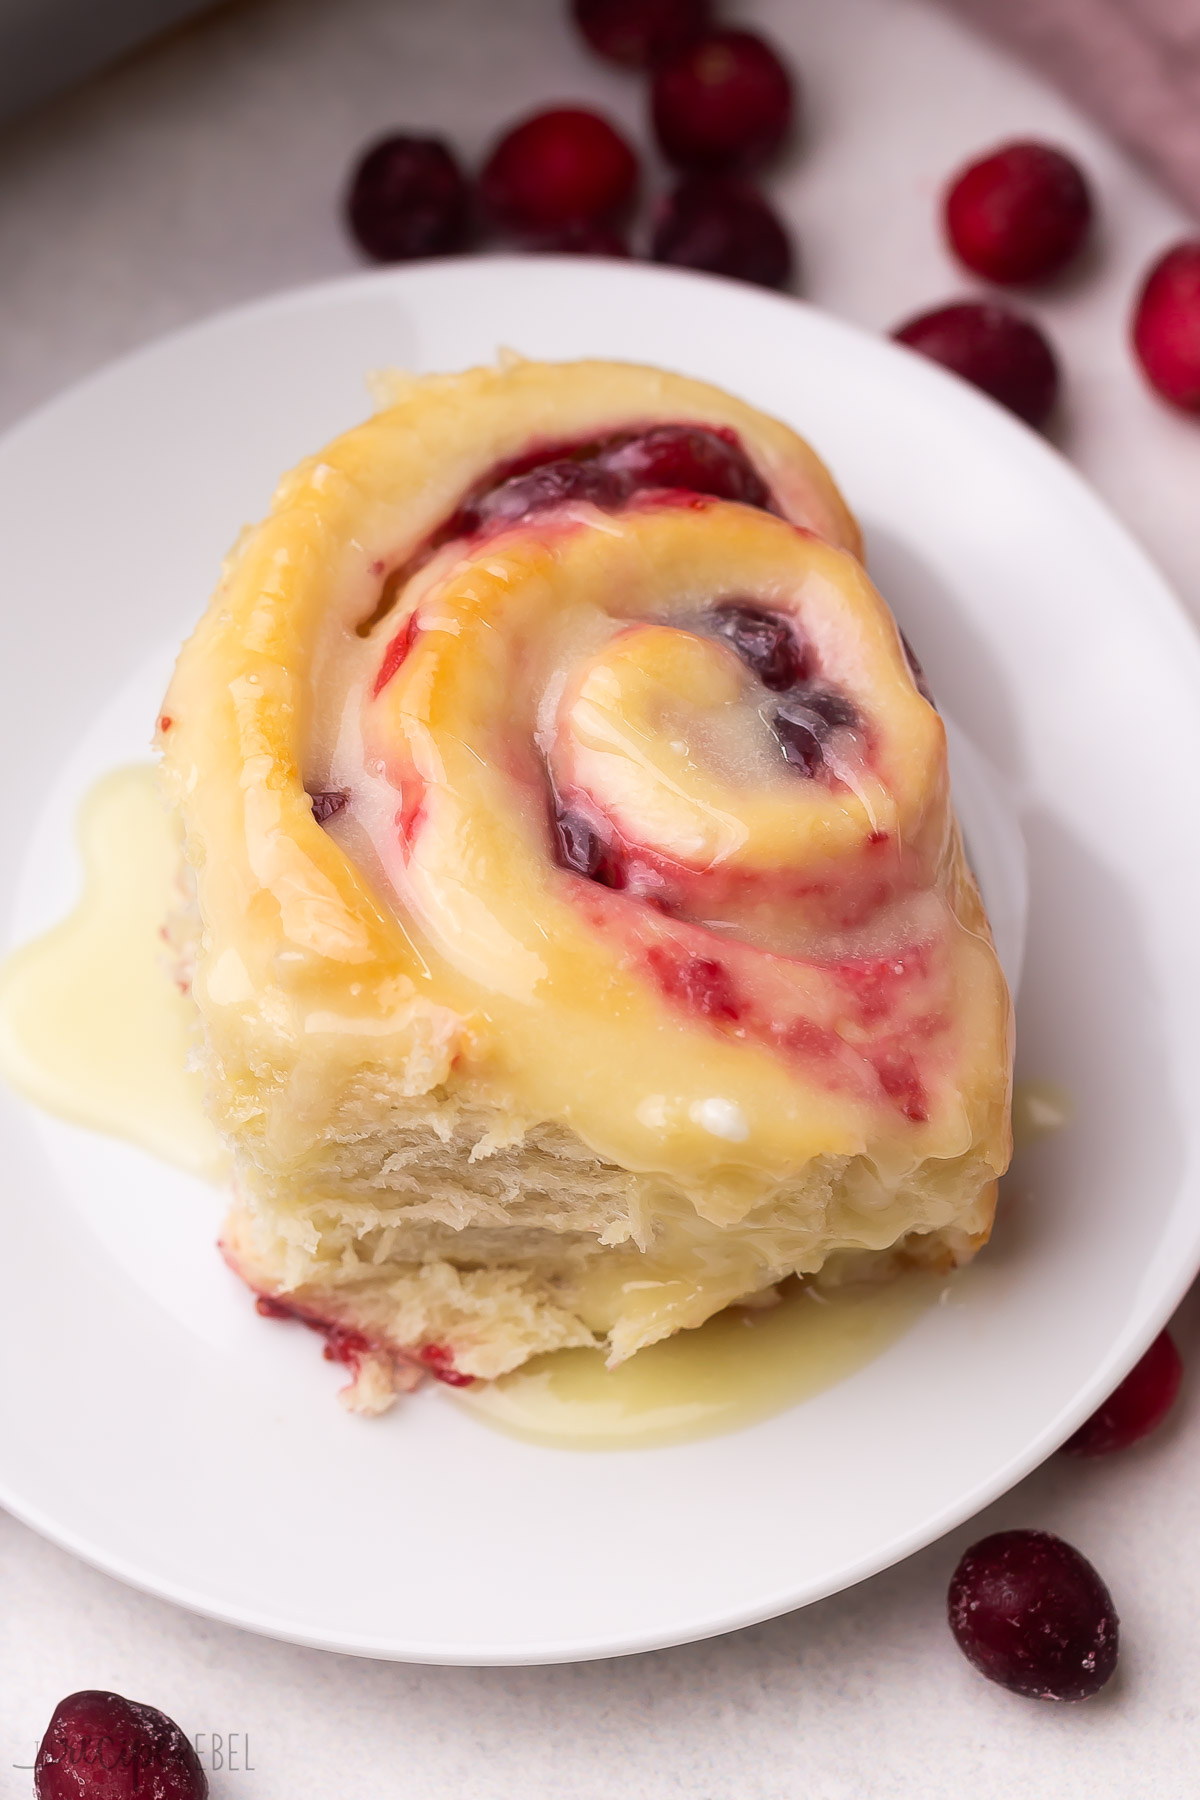 close up image of one cranberry roll on white plate with white chocolate glaze.